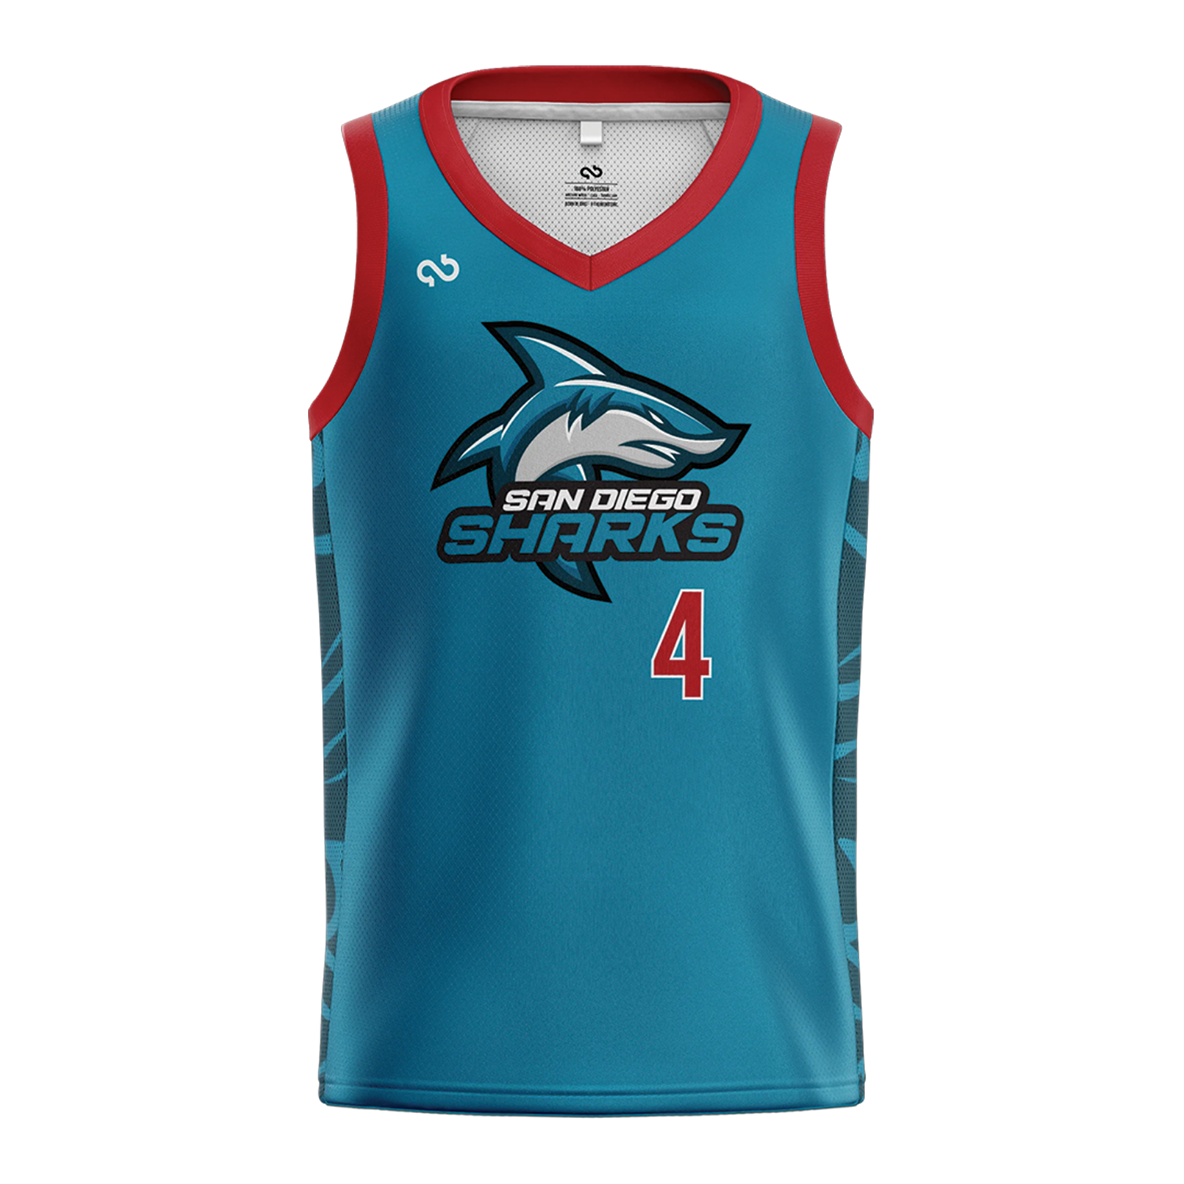 SAN DIEGO SHARKS AUTHENTIC HOME JERSEY